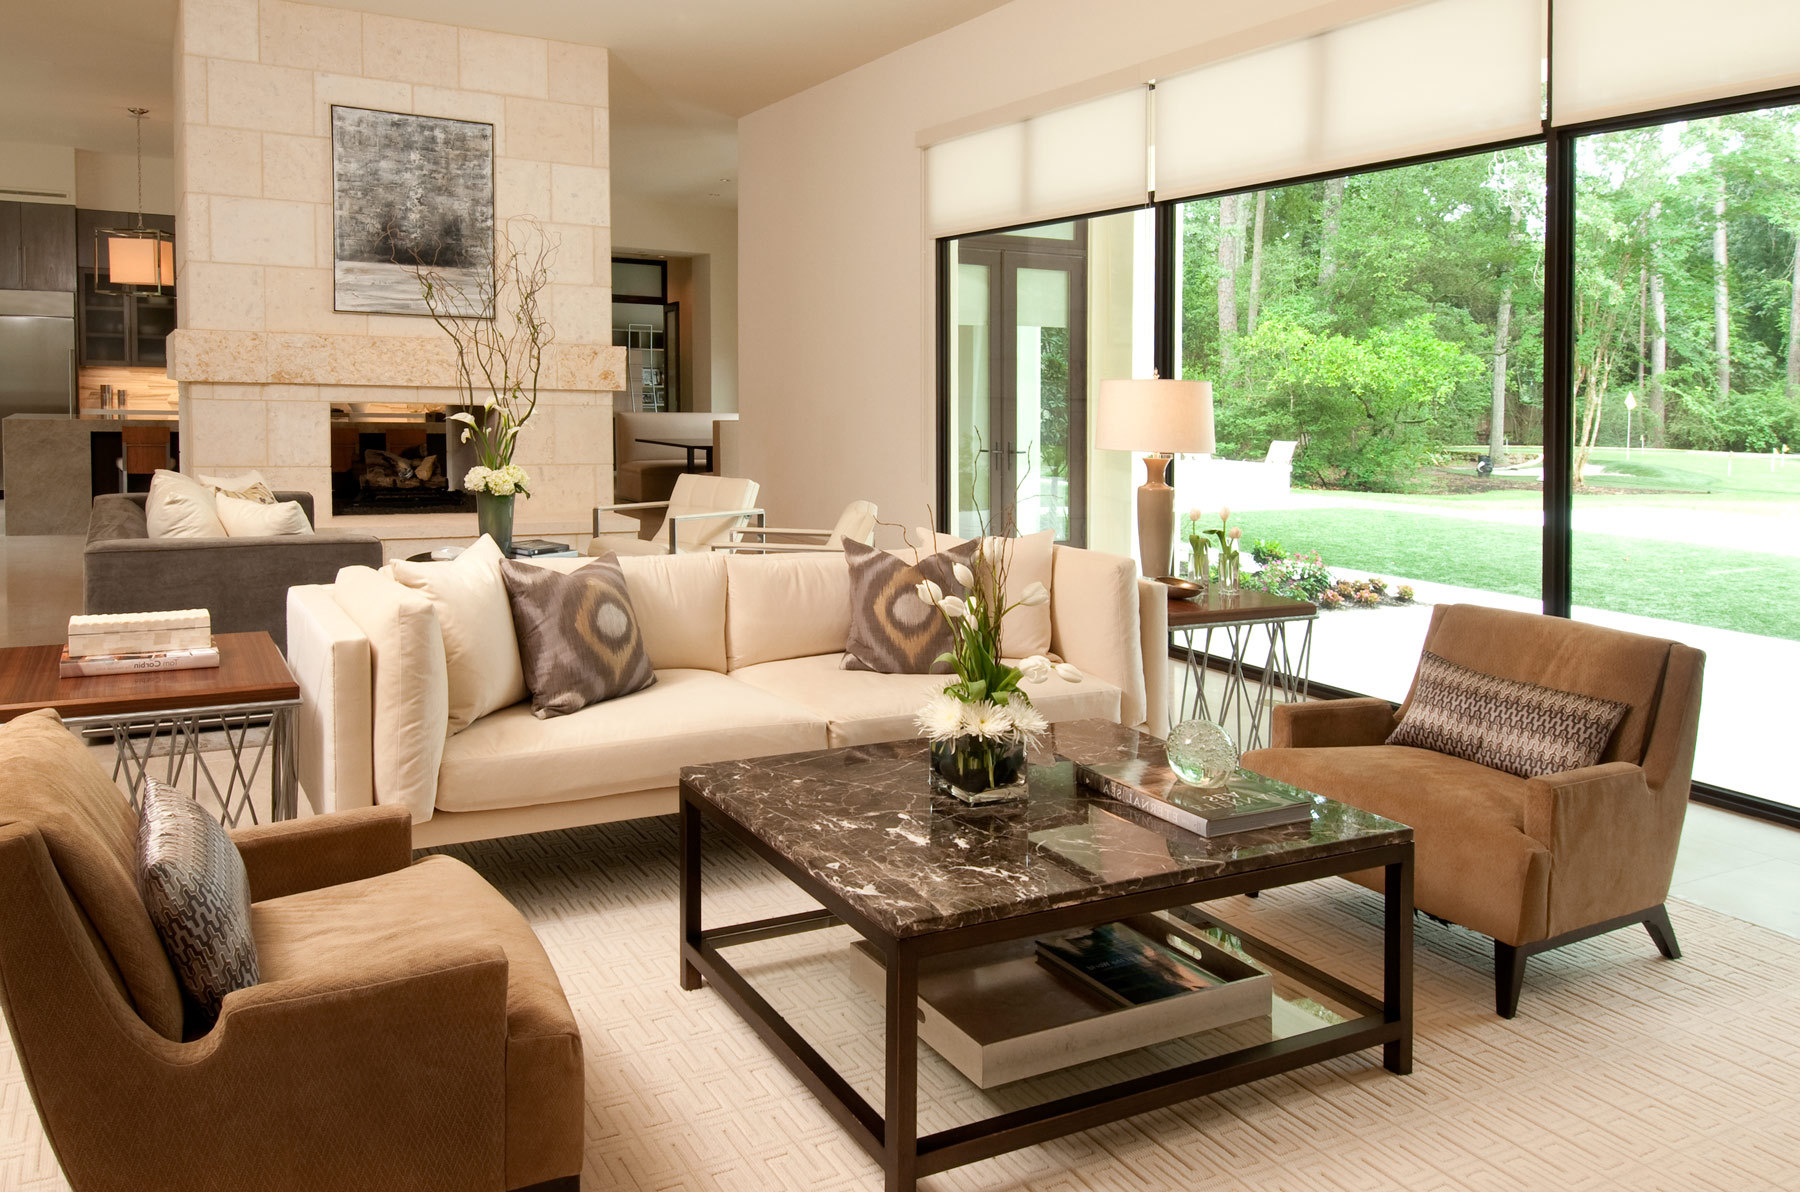 Living Room Designs: Homely Comfort And Style